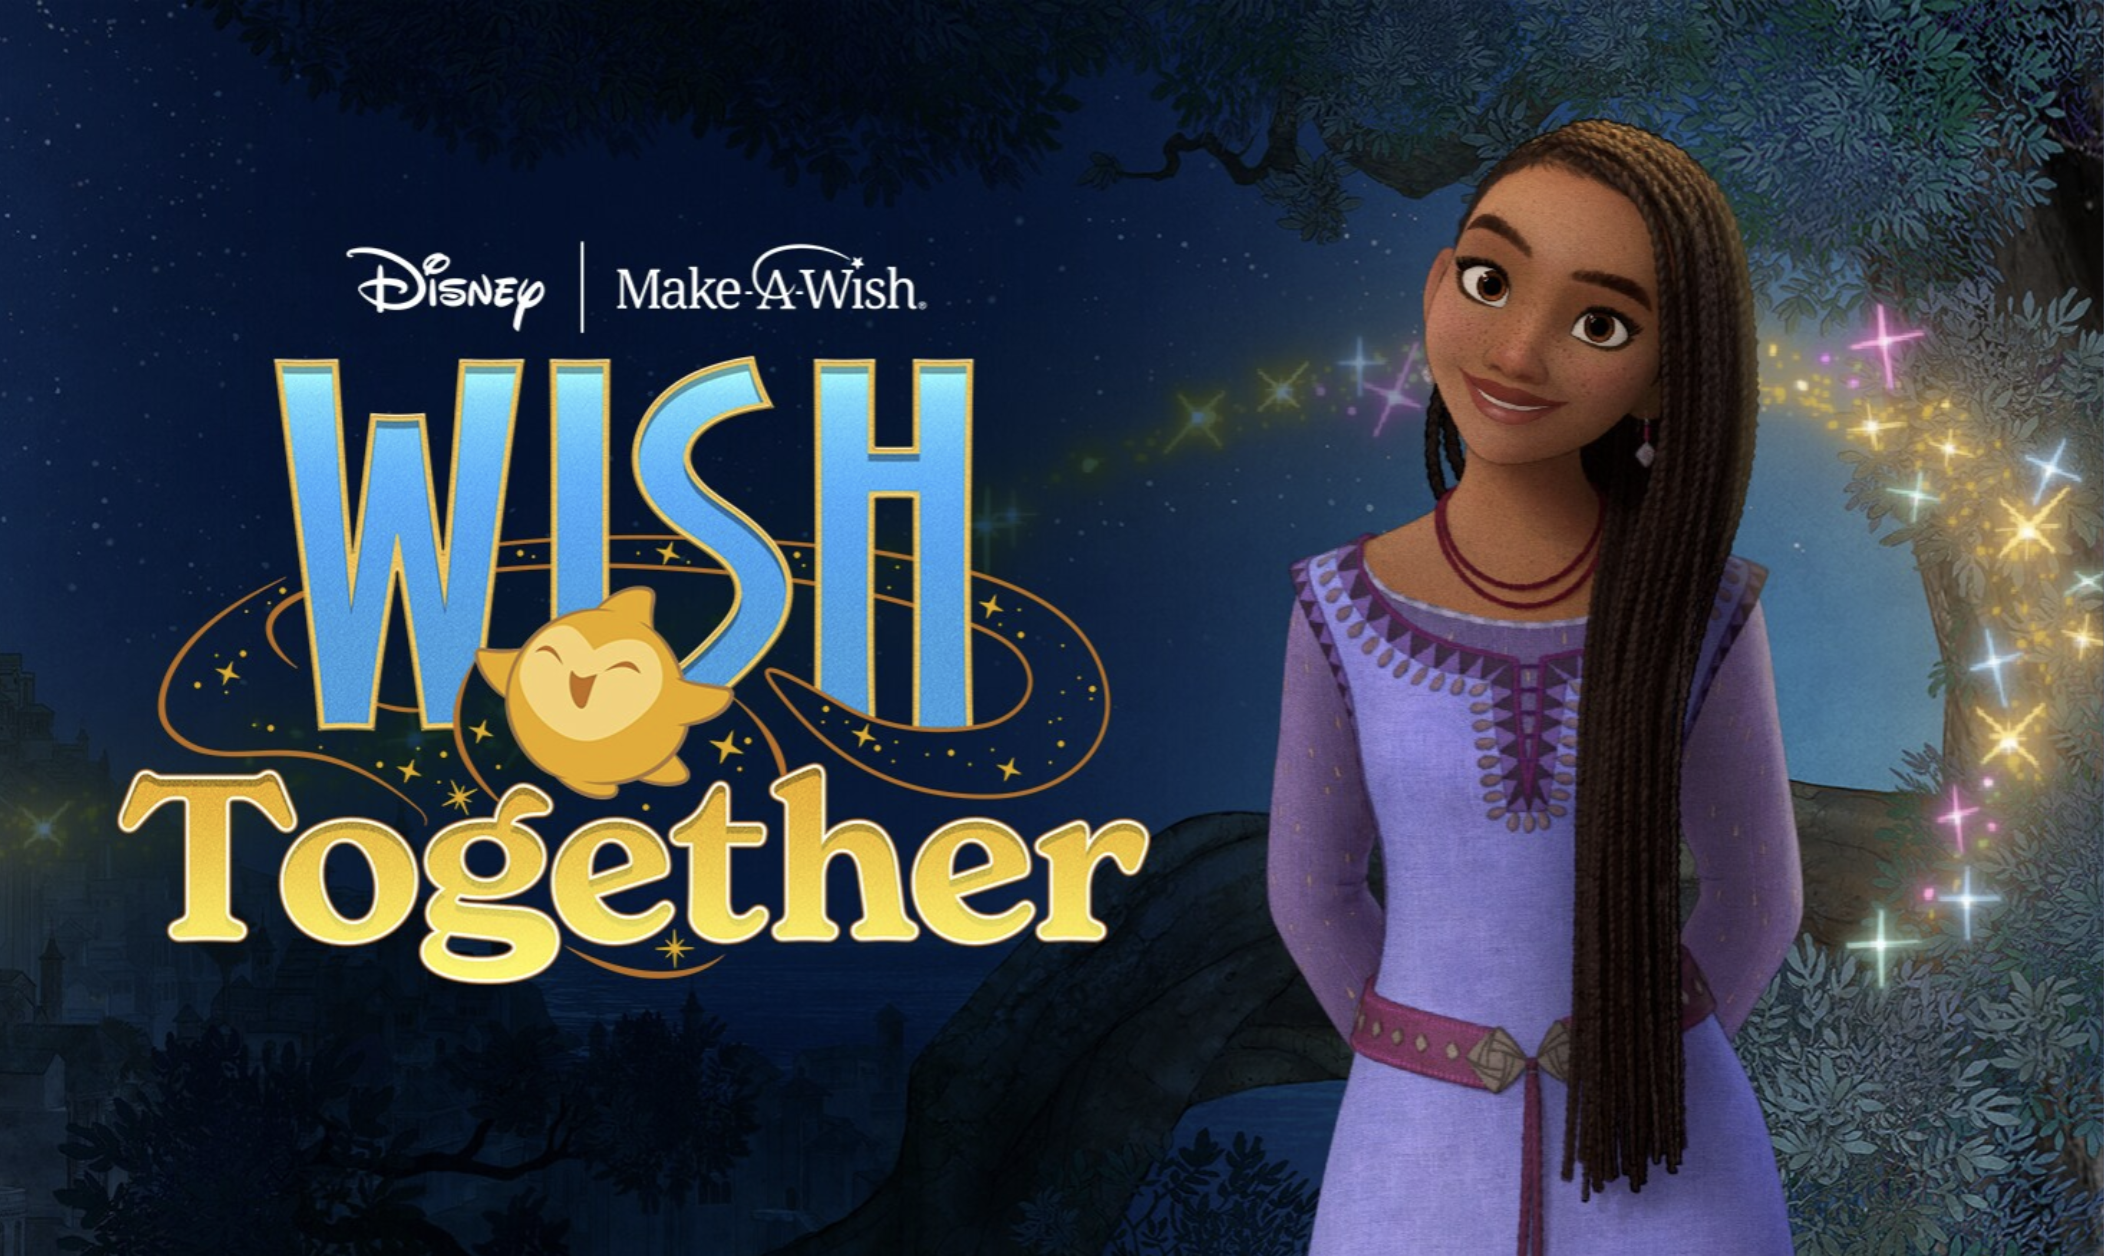 Donate to Make-A-Wish® Kids this Holiday Season in Partnership with Amazon, Disney, and ‘Wish’